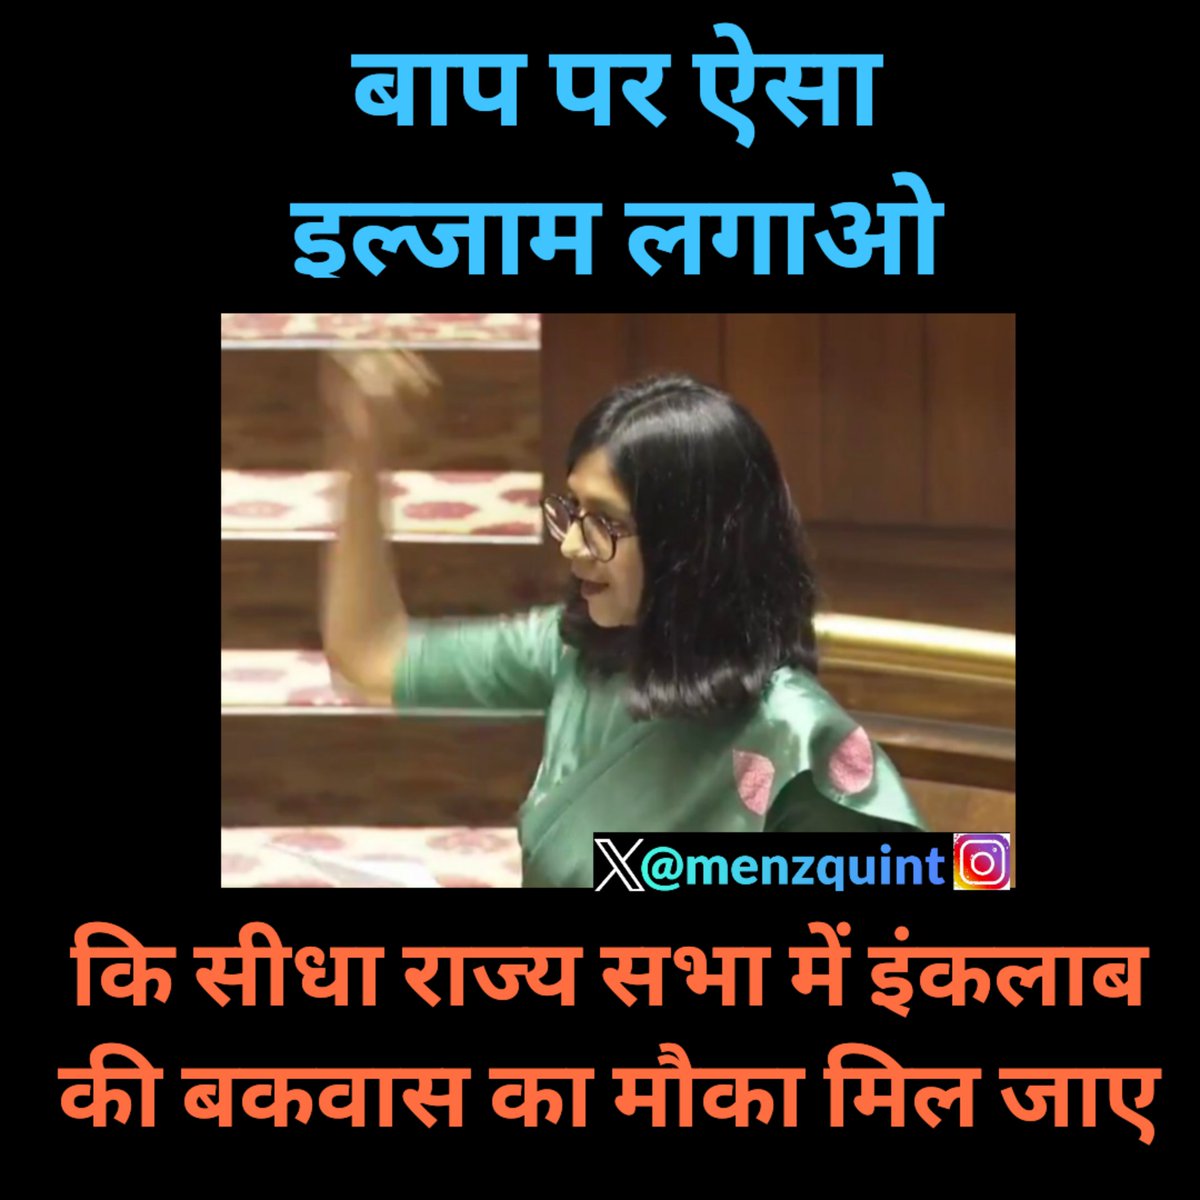 Accuse your father of sexual abuse and secure a seat at Rajya Sabha. Wah re kejriwal
#WomenEmpowement
#SwatiMaliwal 
#RapePolitics